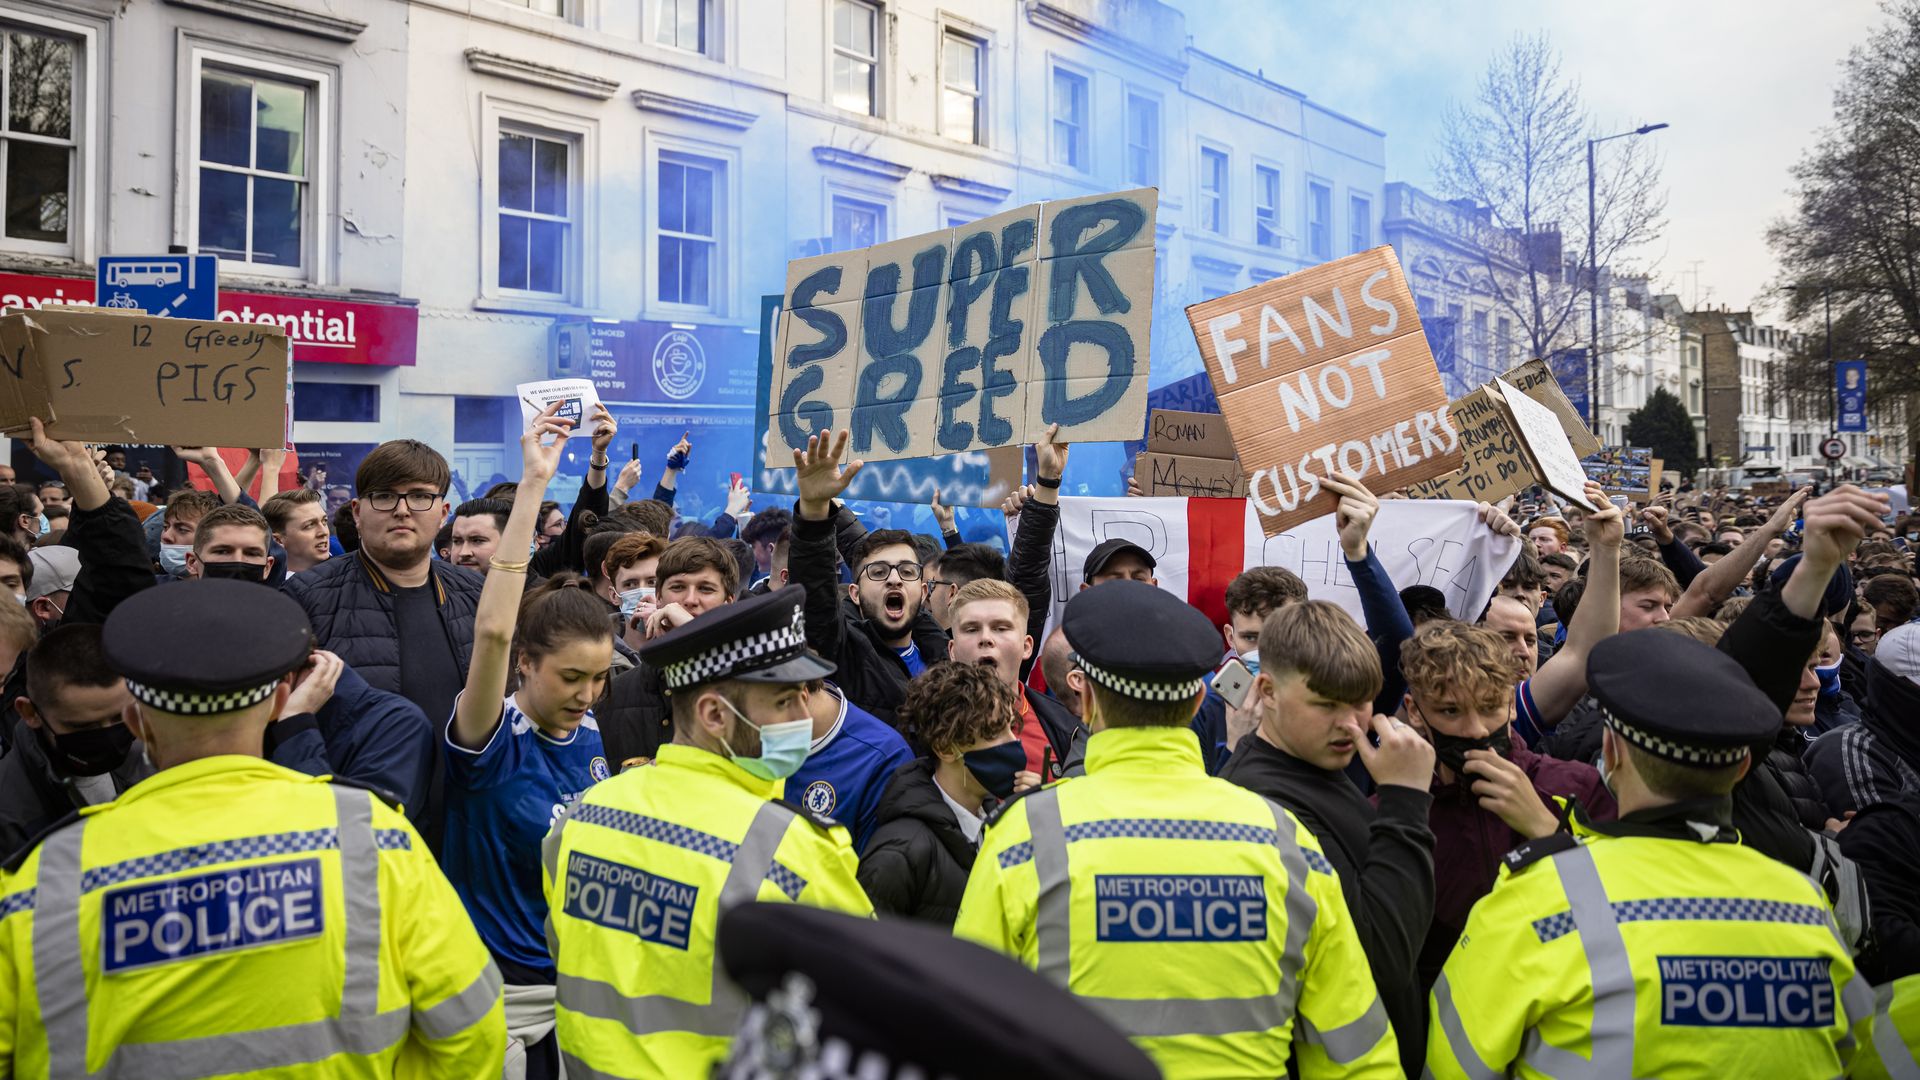 Fans of Chelsea Football Club protest against the European Super League outside Stamford Bridge on April 20, 2021 in London, England. 